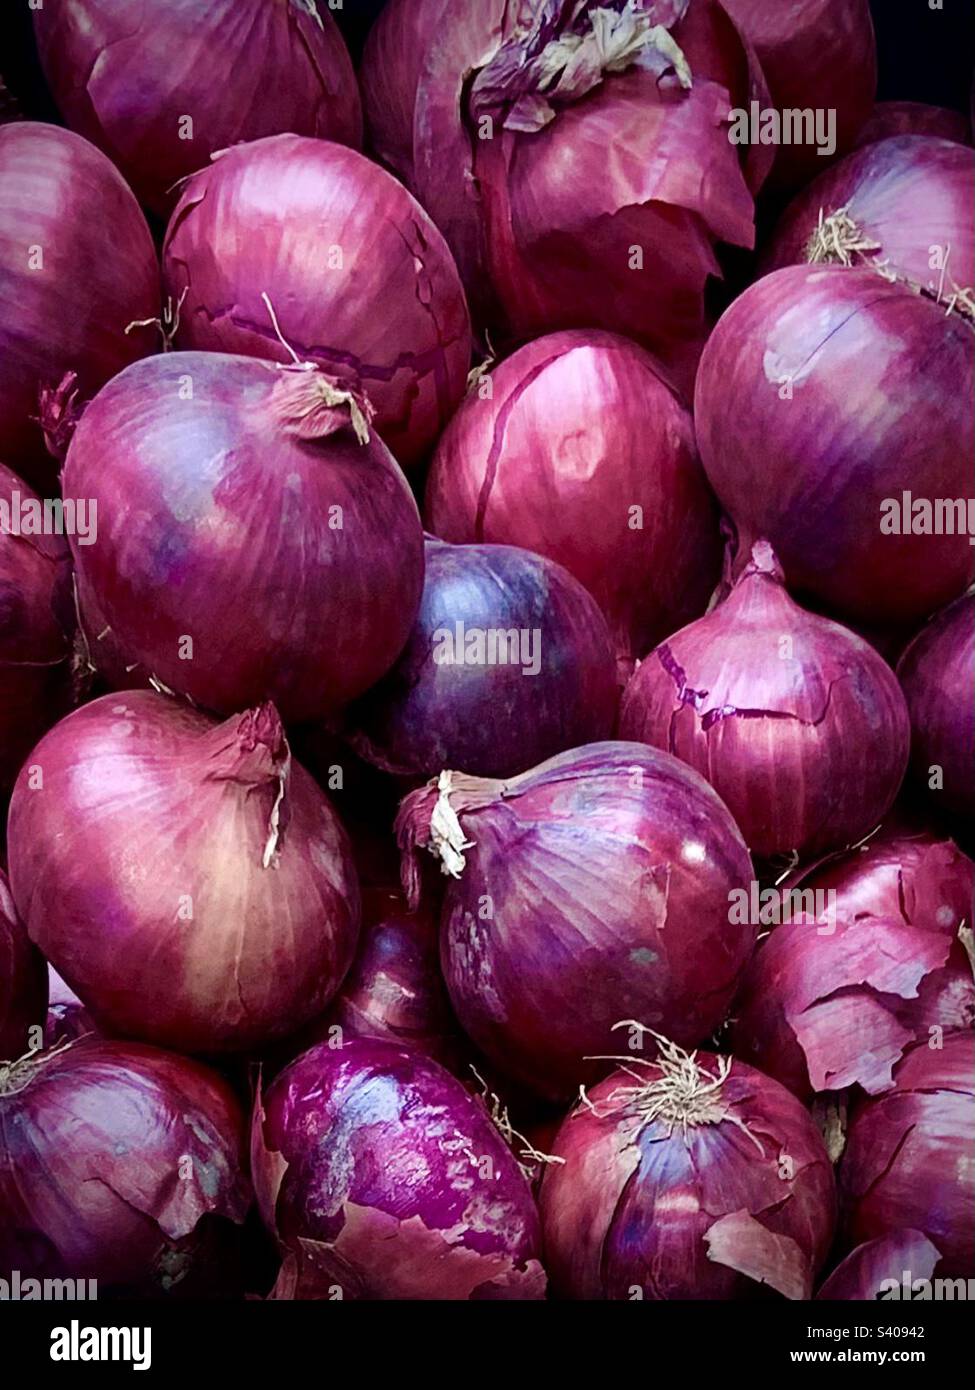 Lots of red onions at the market Stock Photo